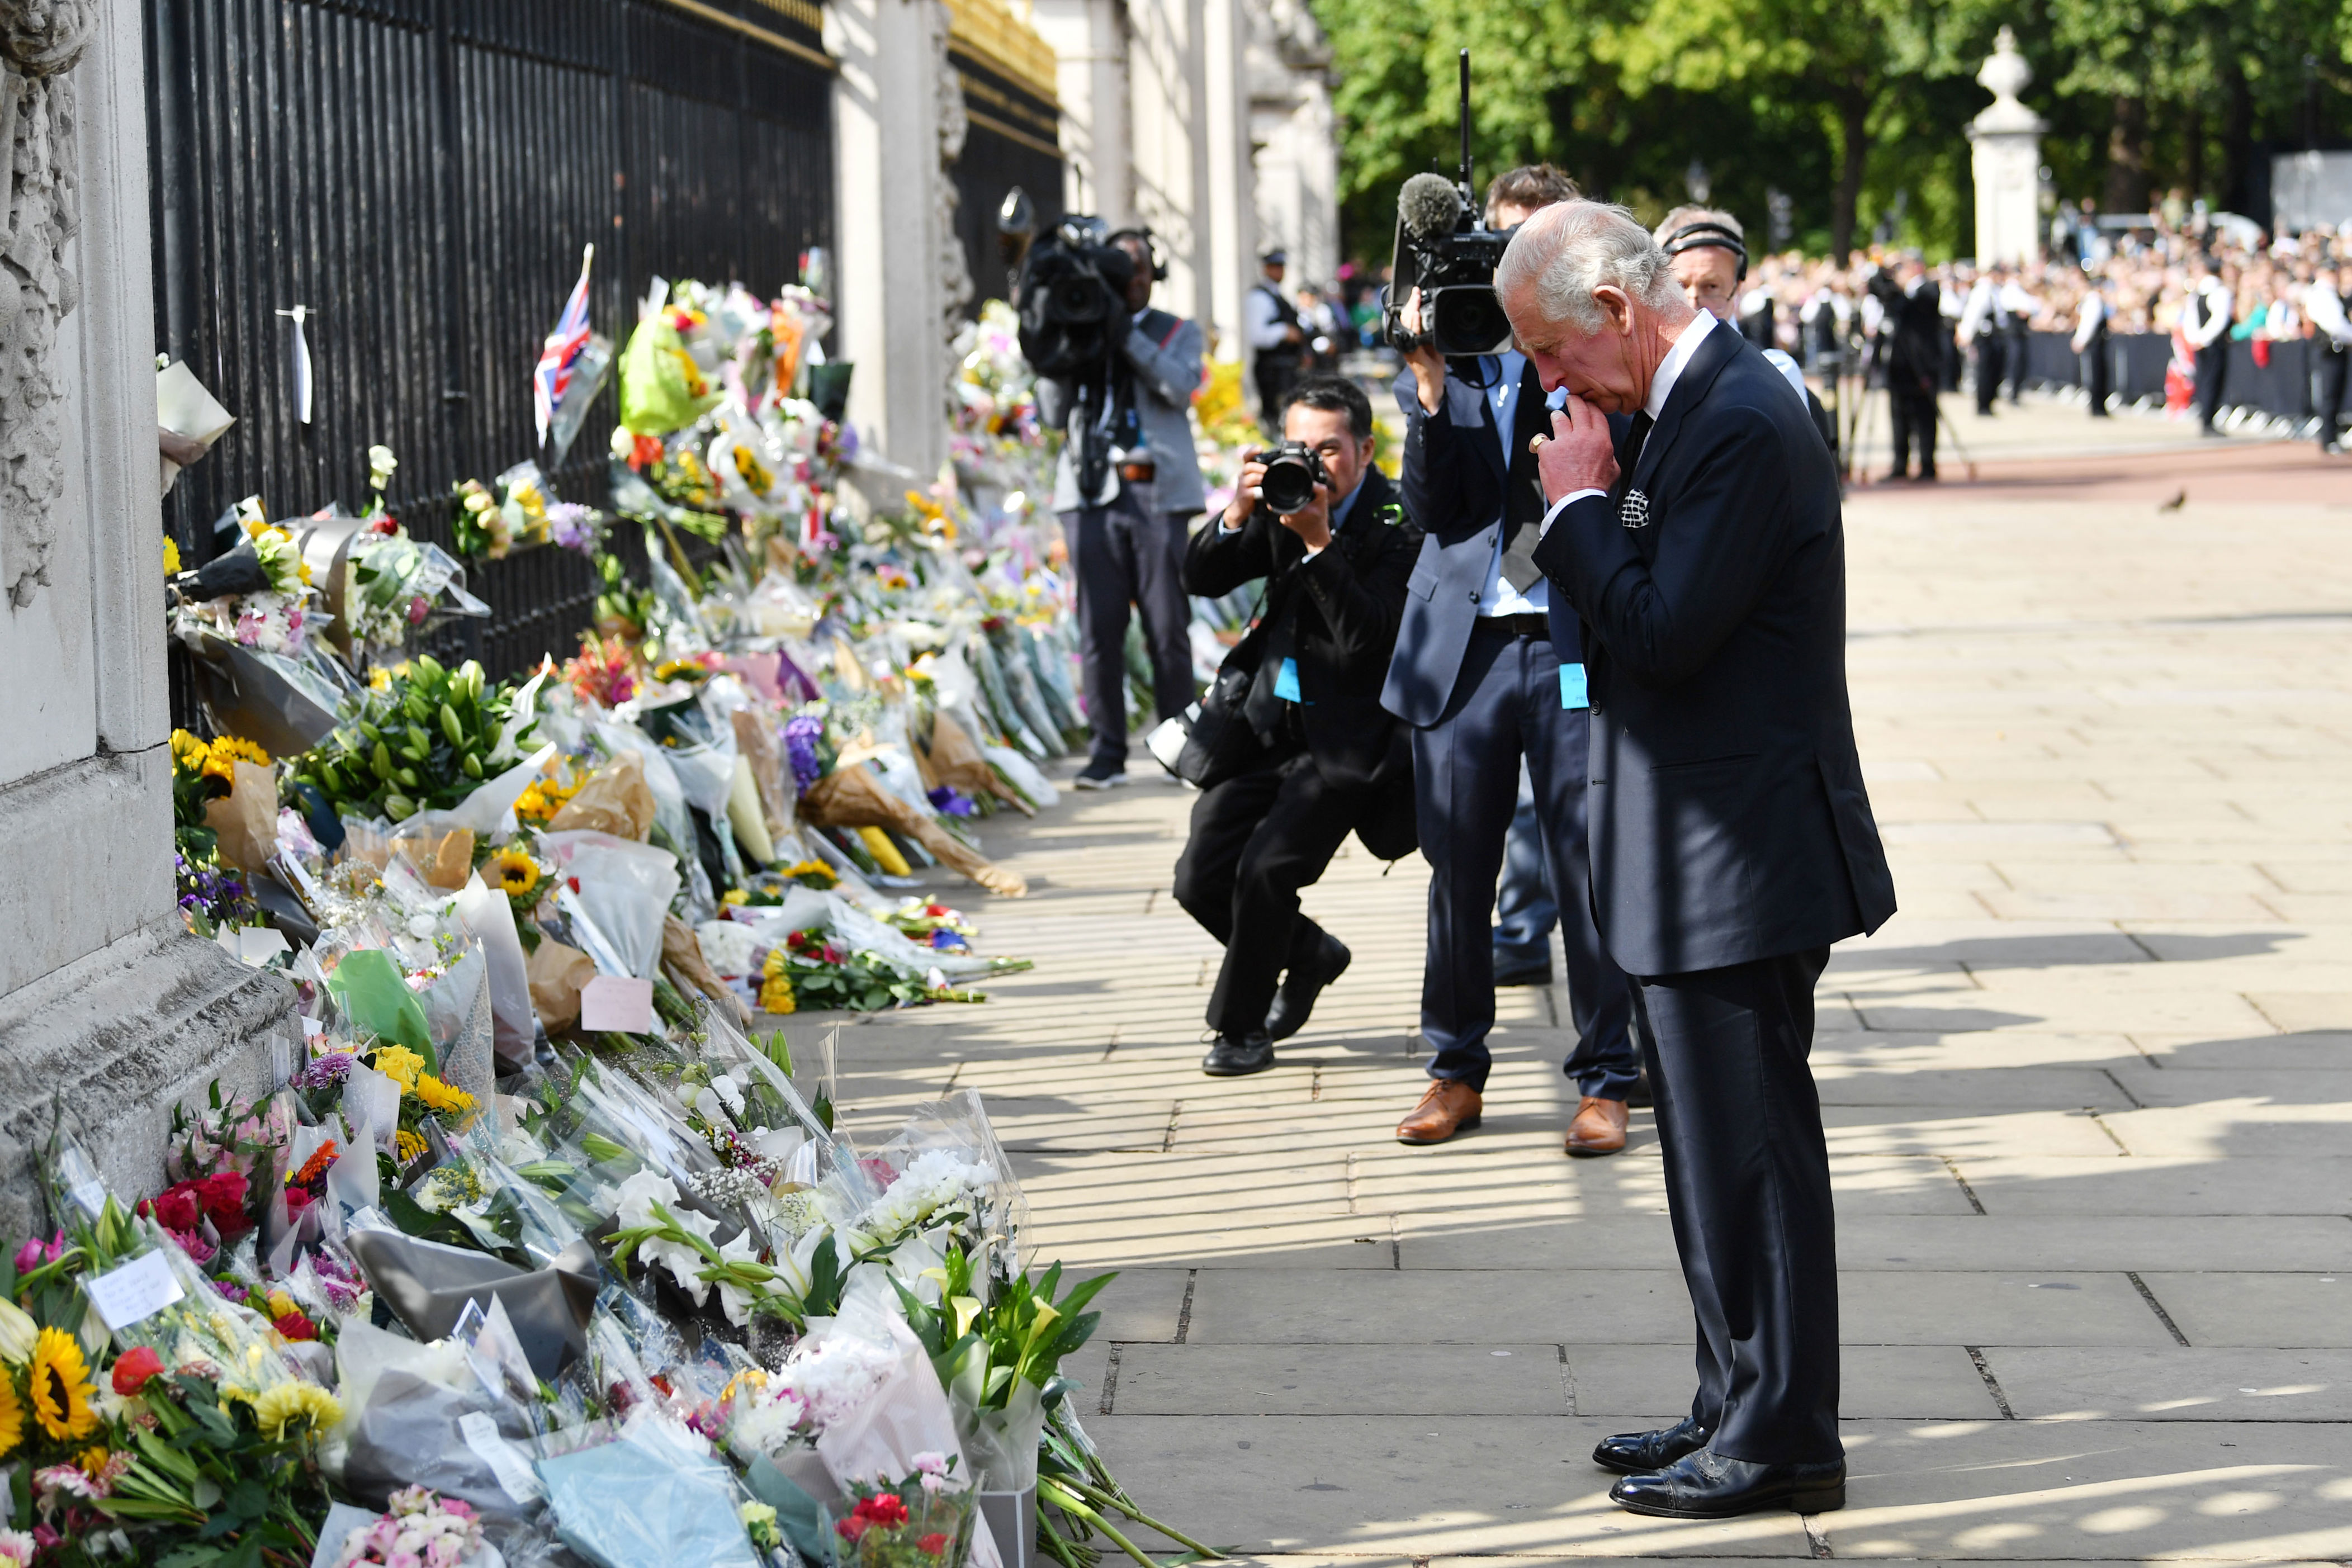 <p>A grieving King Charles III took a moment to reflect on the thousands of floral tributes left for his mother, Queen Elizabeth II, outside the gates of Buckingham Palace in London on Sept. 9, 2022, the morning after <a href="https://www.wonderwall.com/celebrity/celebrities-dignitaries-react-to-death-of-queen-elizabeth-ii-647756.gallery">the monarch died in Scotland</a>.</p>